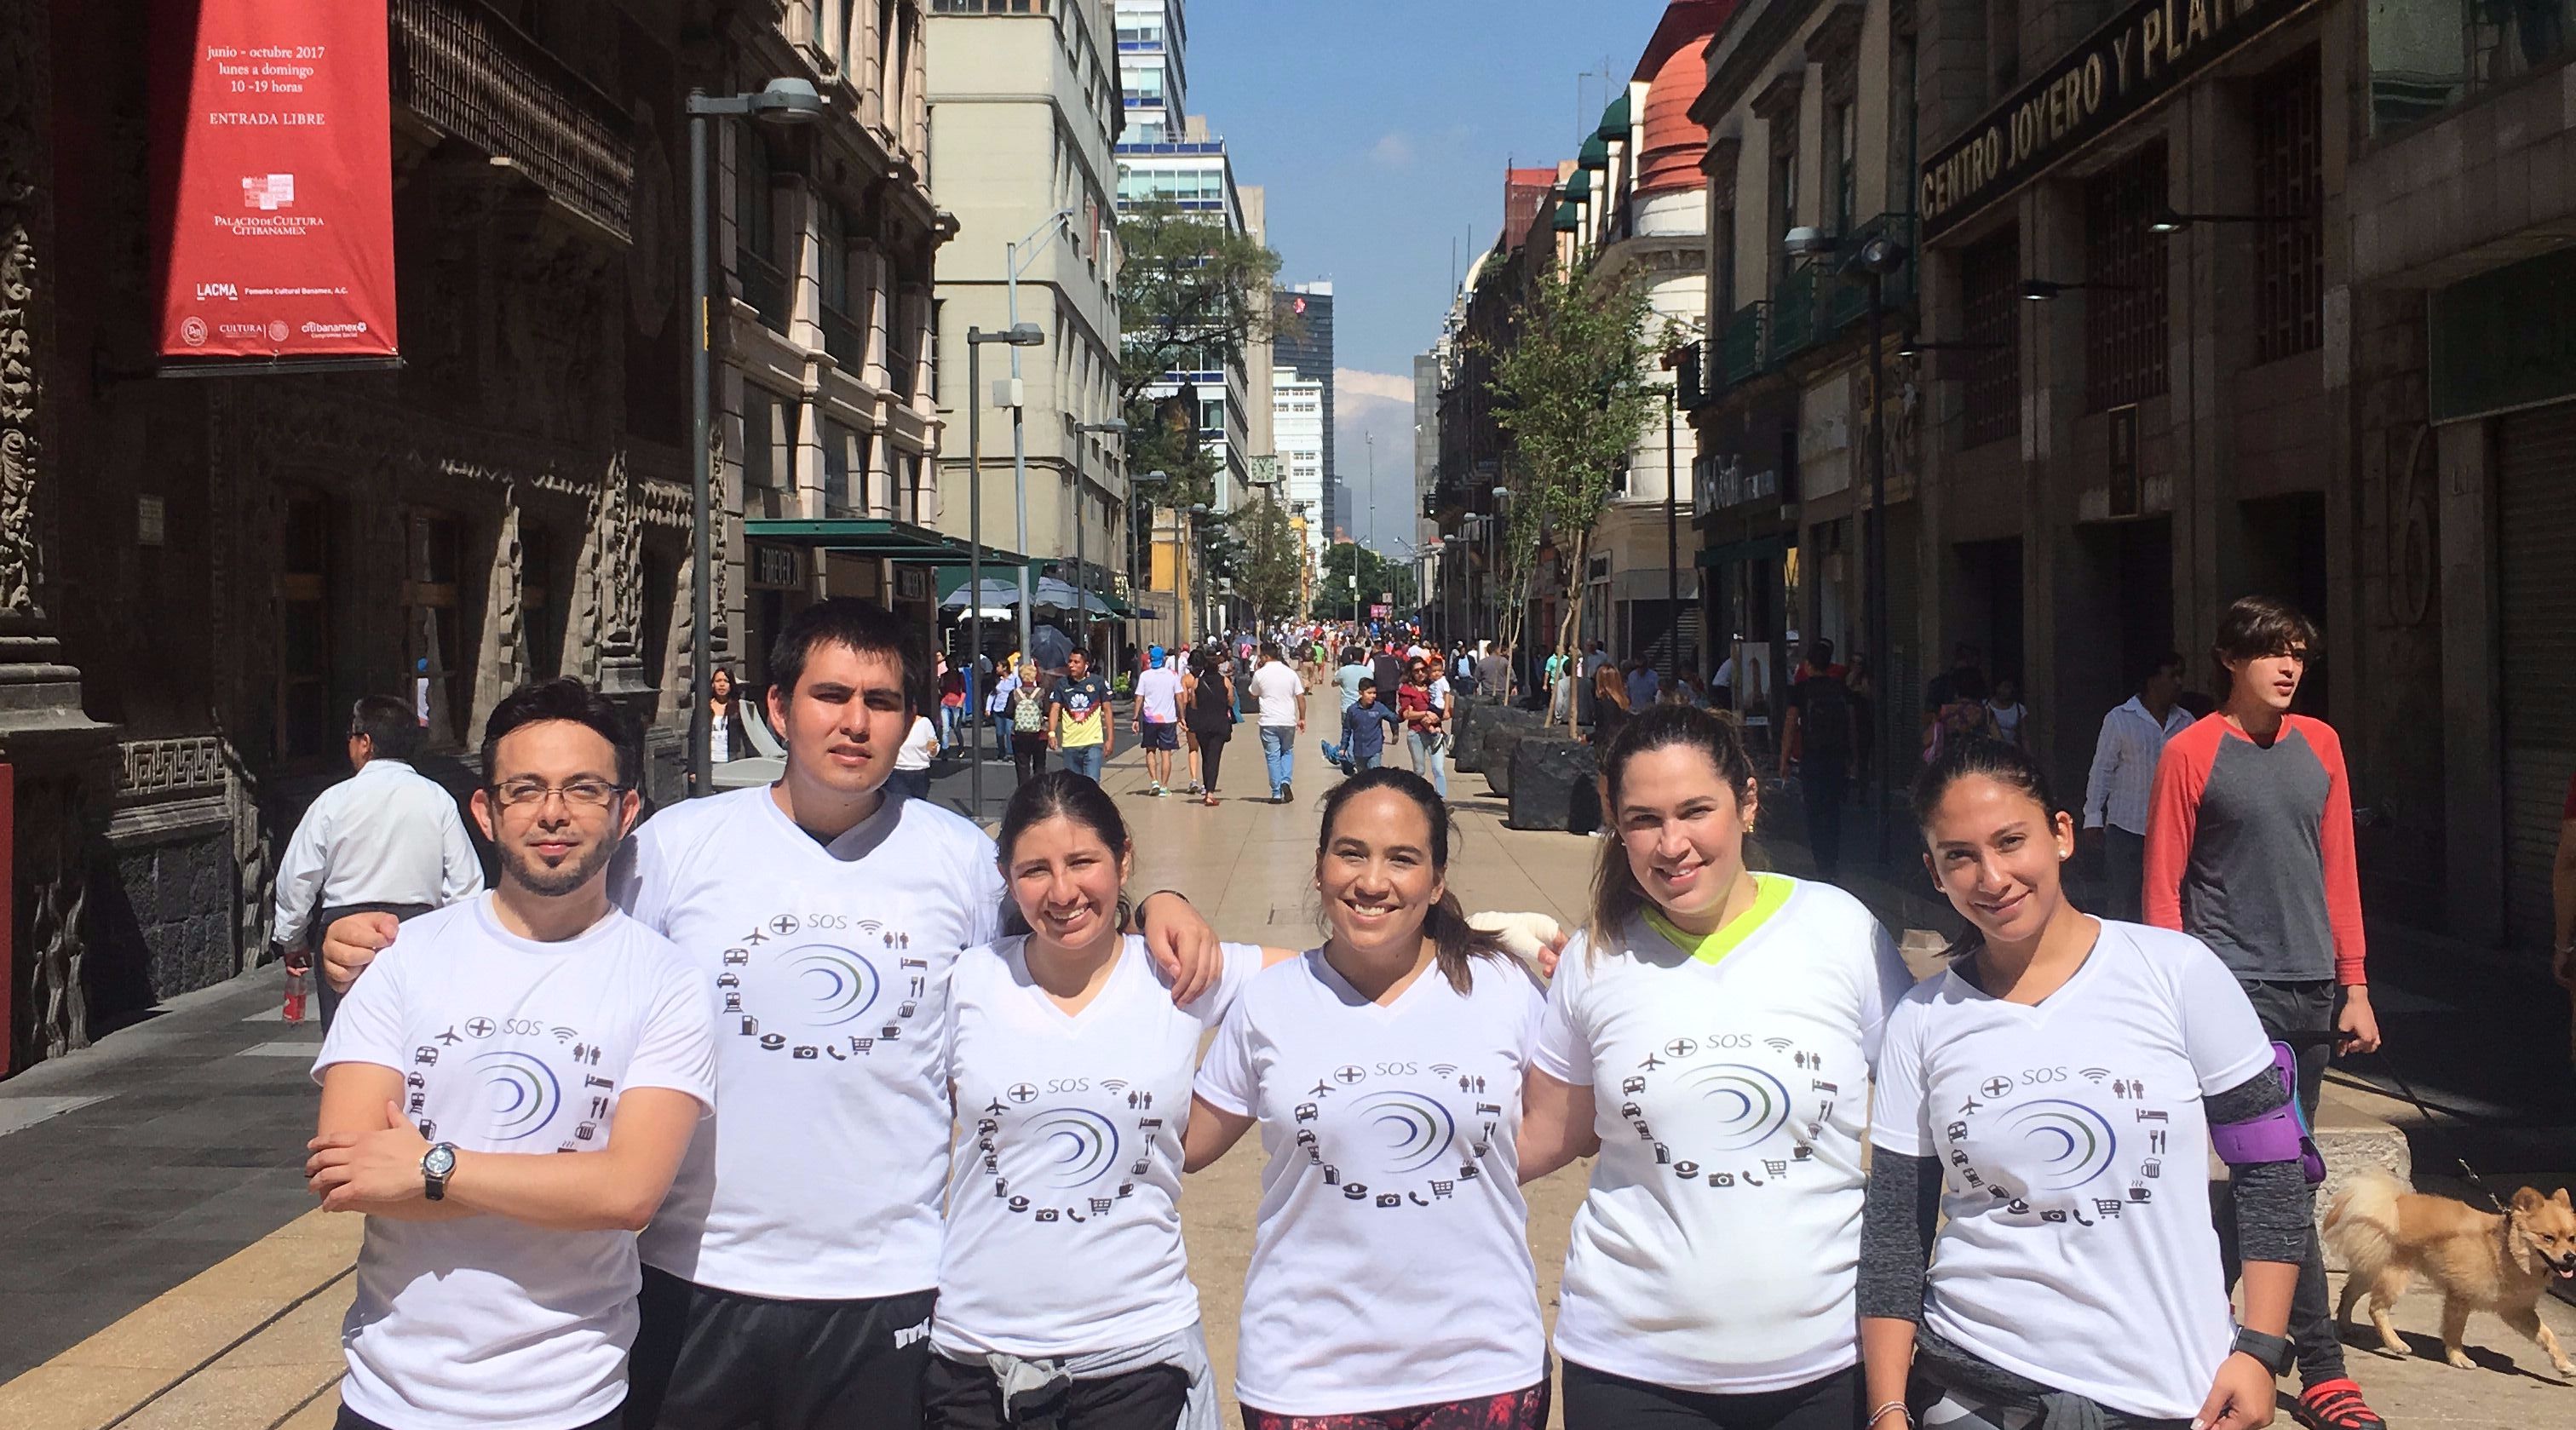 5K Running & Sightseeing Tour in Mexico City